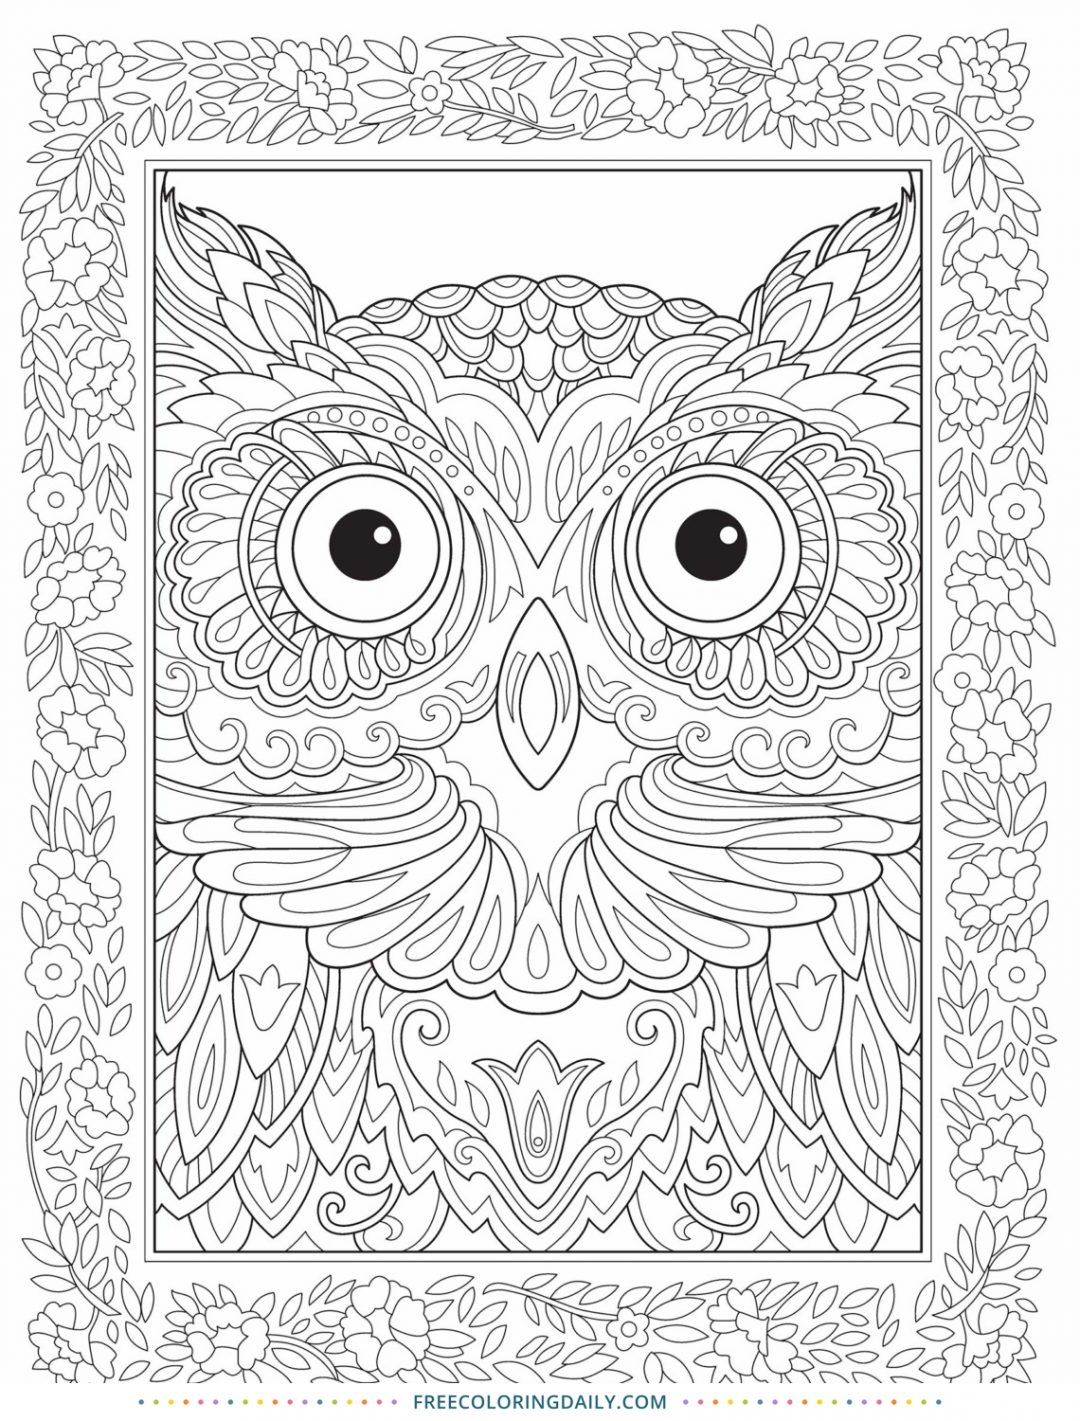 Free Amazing Owl Coloring Page